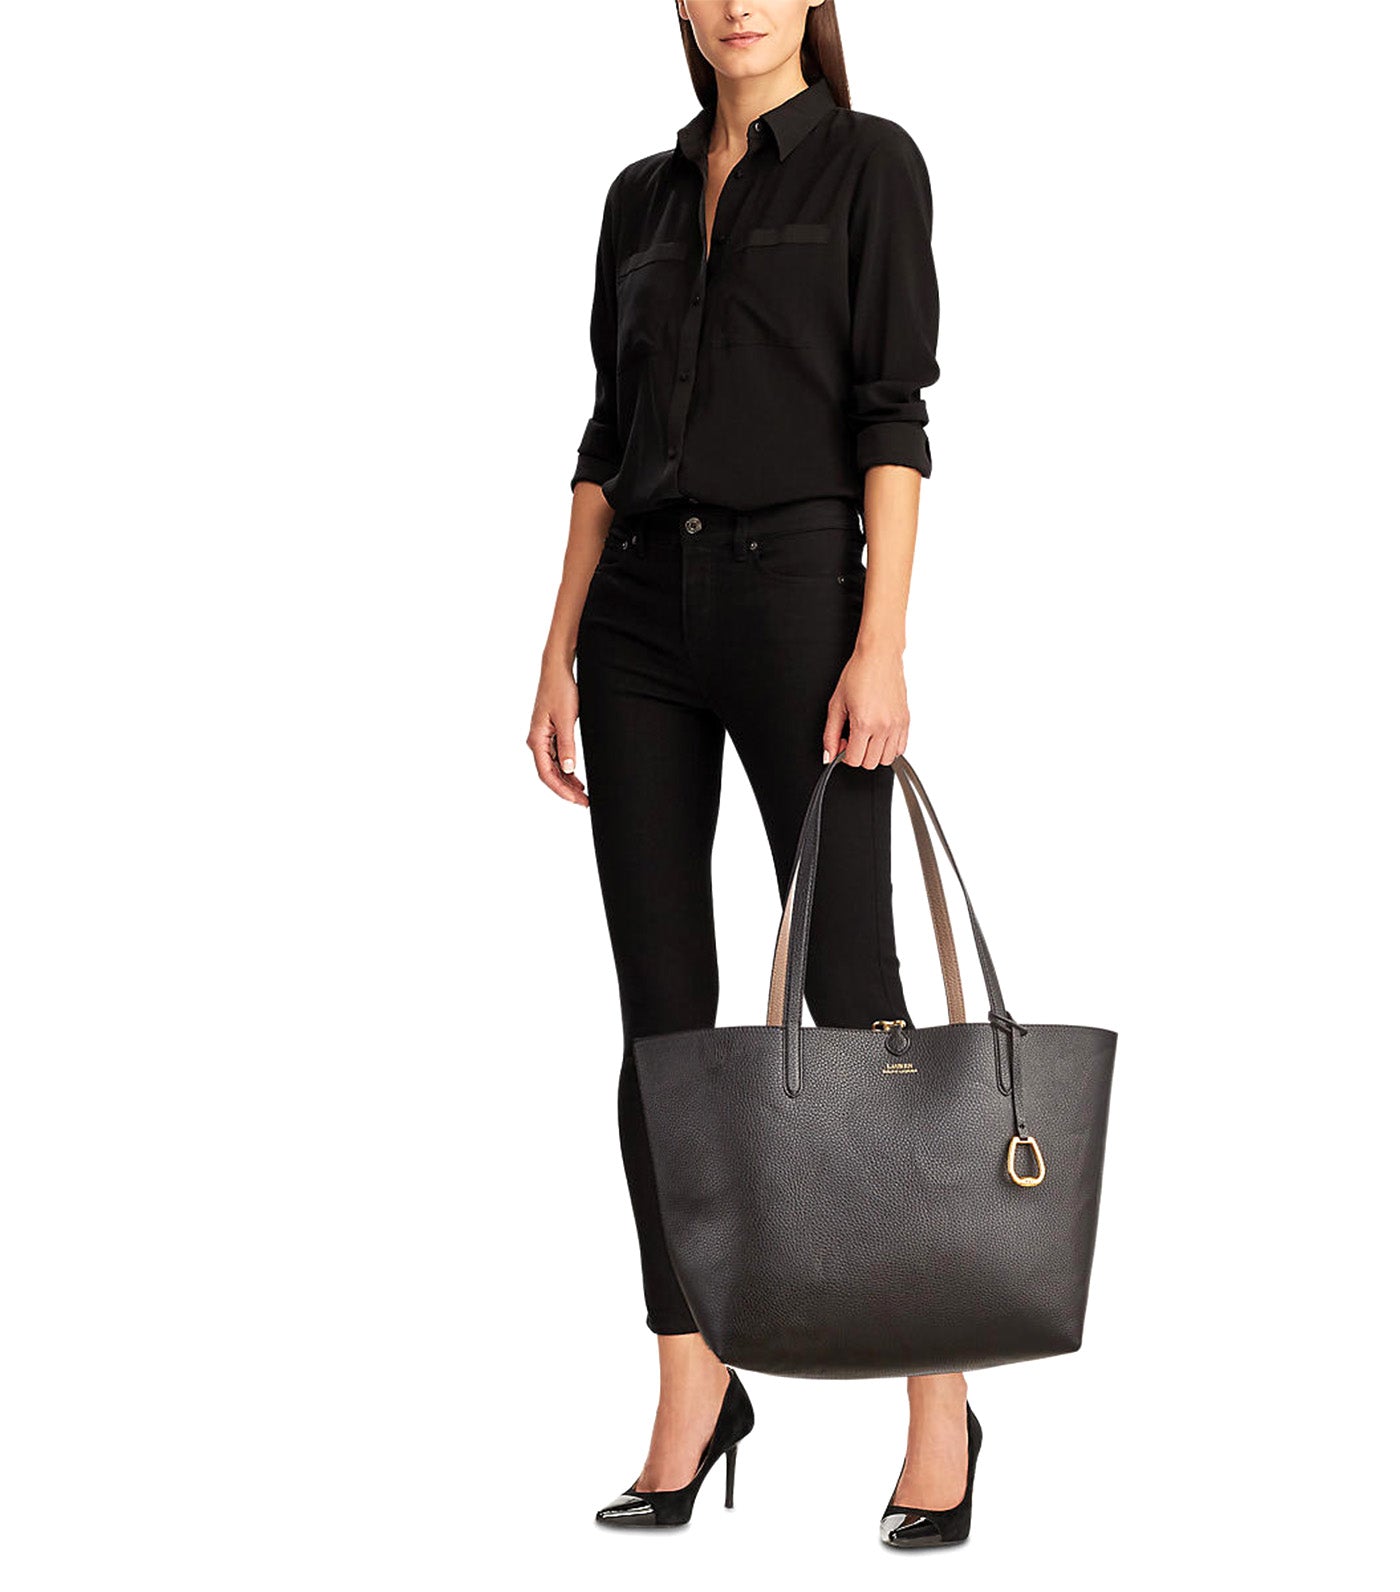 Women's Faux Leather Reversible Tote Black/Taupe